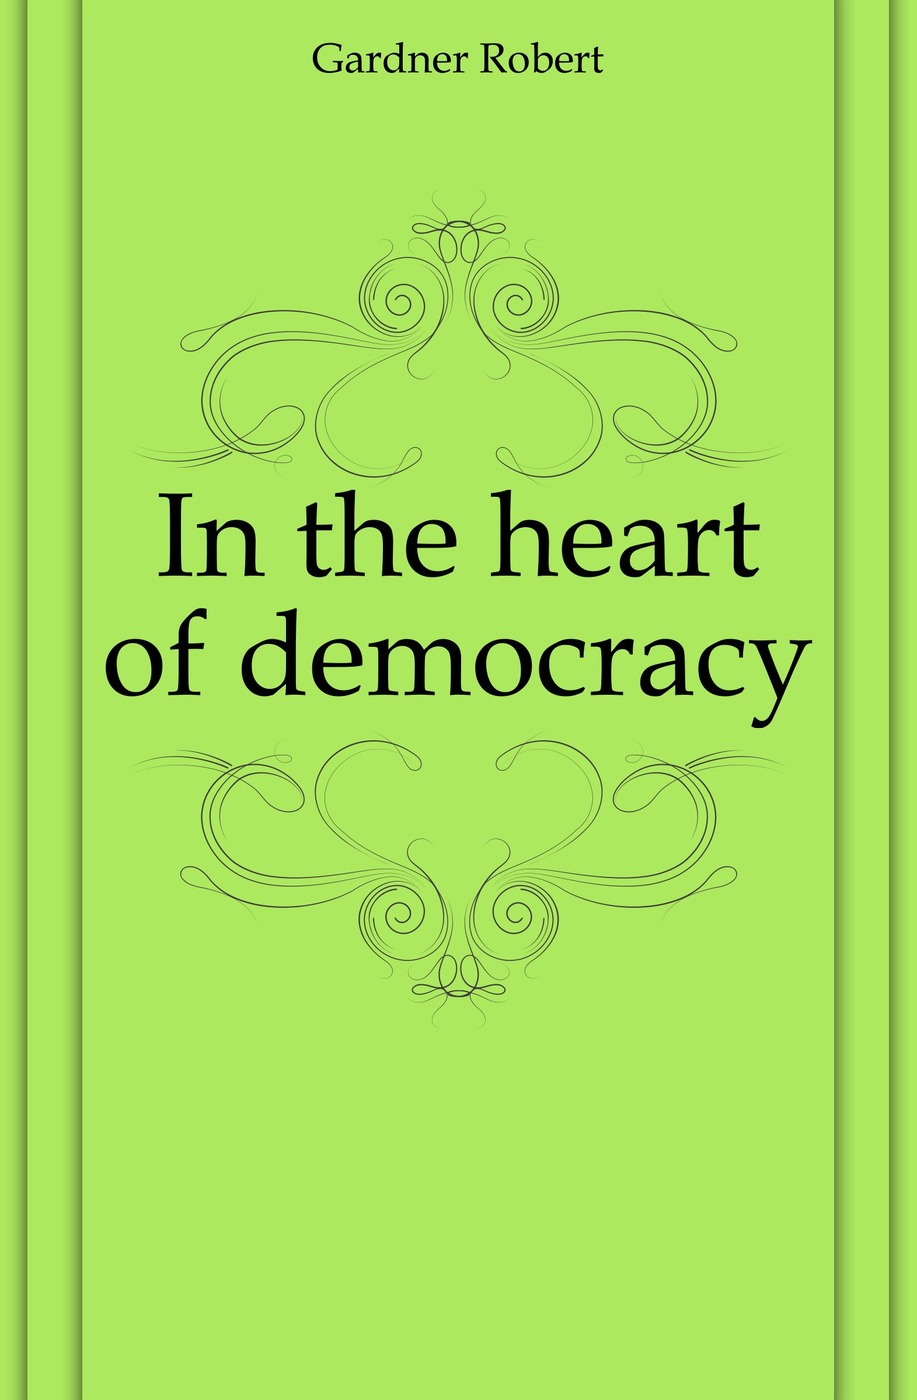 In the heart of democracy